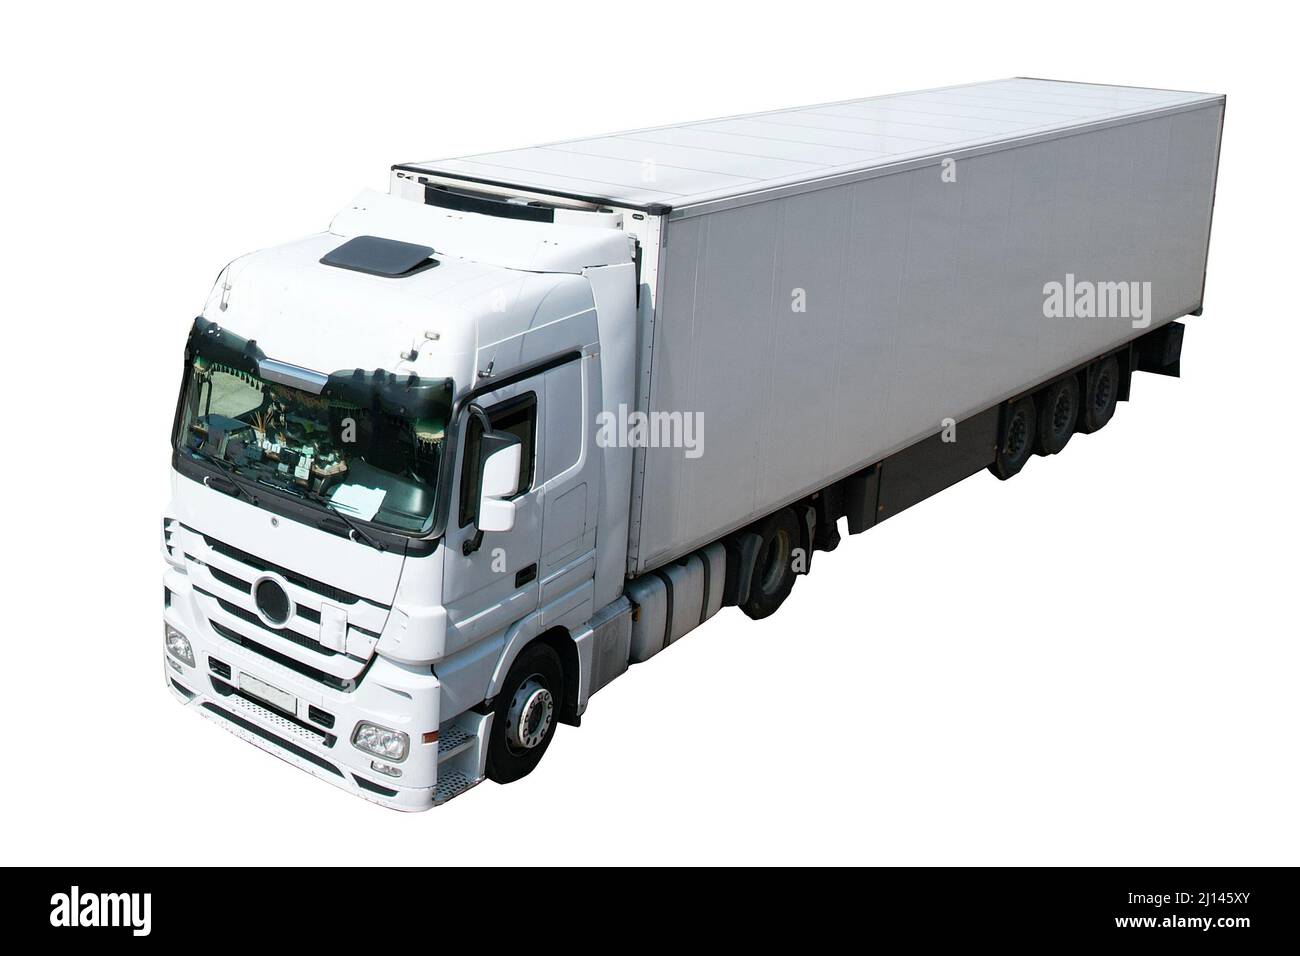 White trailer truck side front view isolated with path Stock Photo